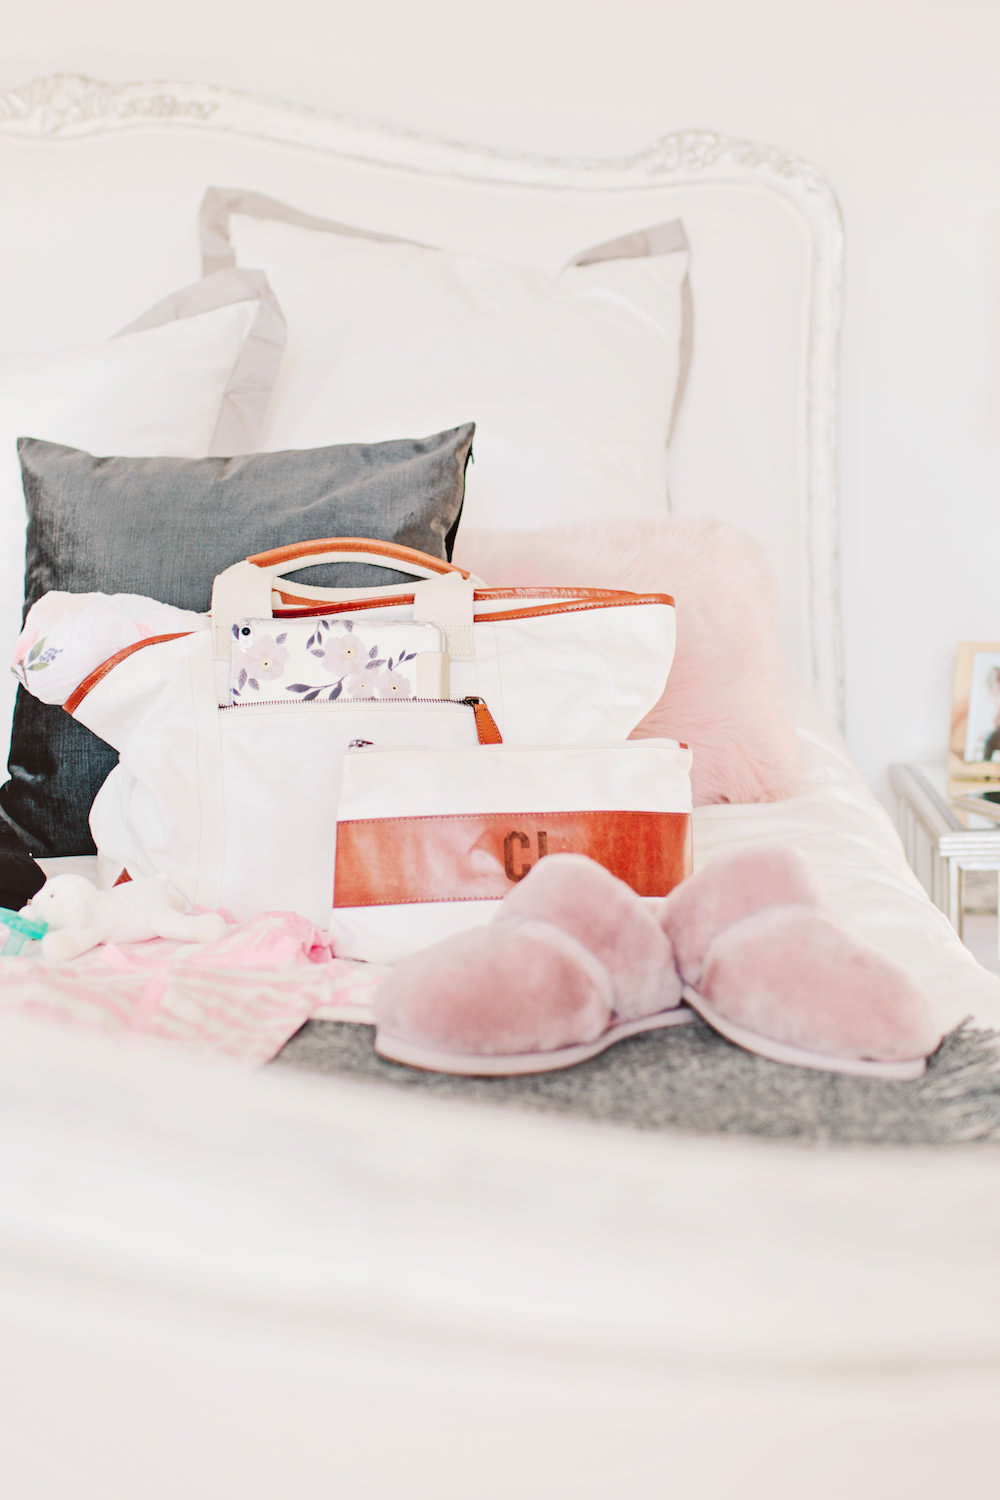 What to pack in your hospital bag for labor and delivery for mama and baby by Dash of Darling